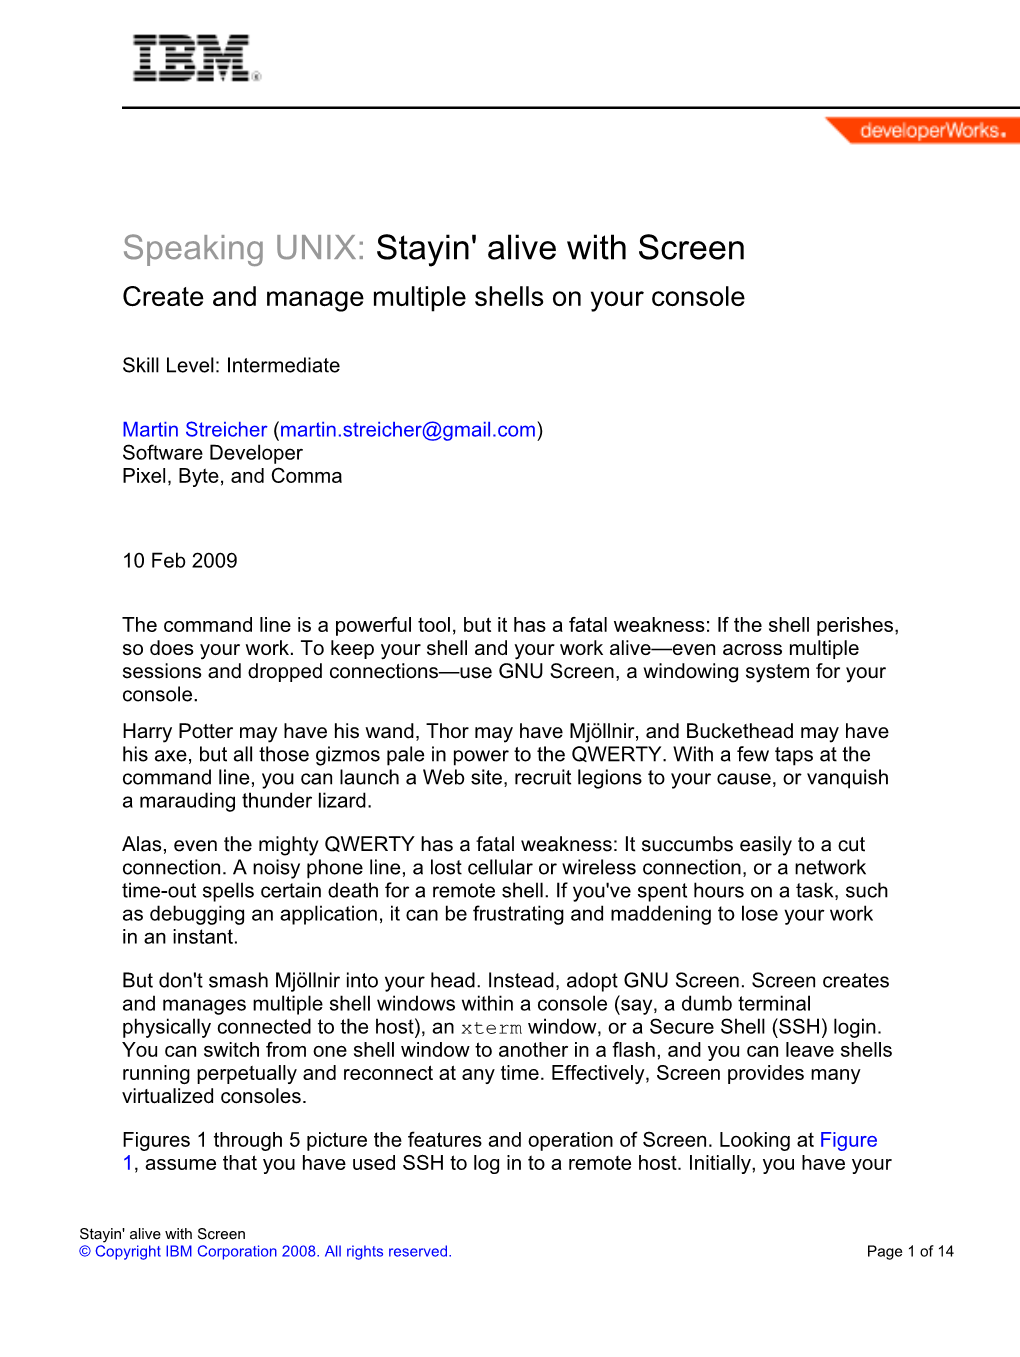 Speaking UNIX: Stayin' Alive with Screen Create and Manage Multiple Shells on Your Console